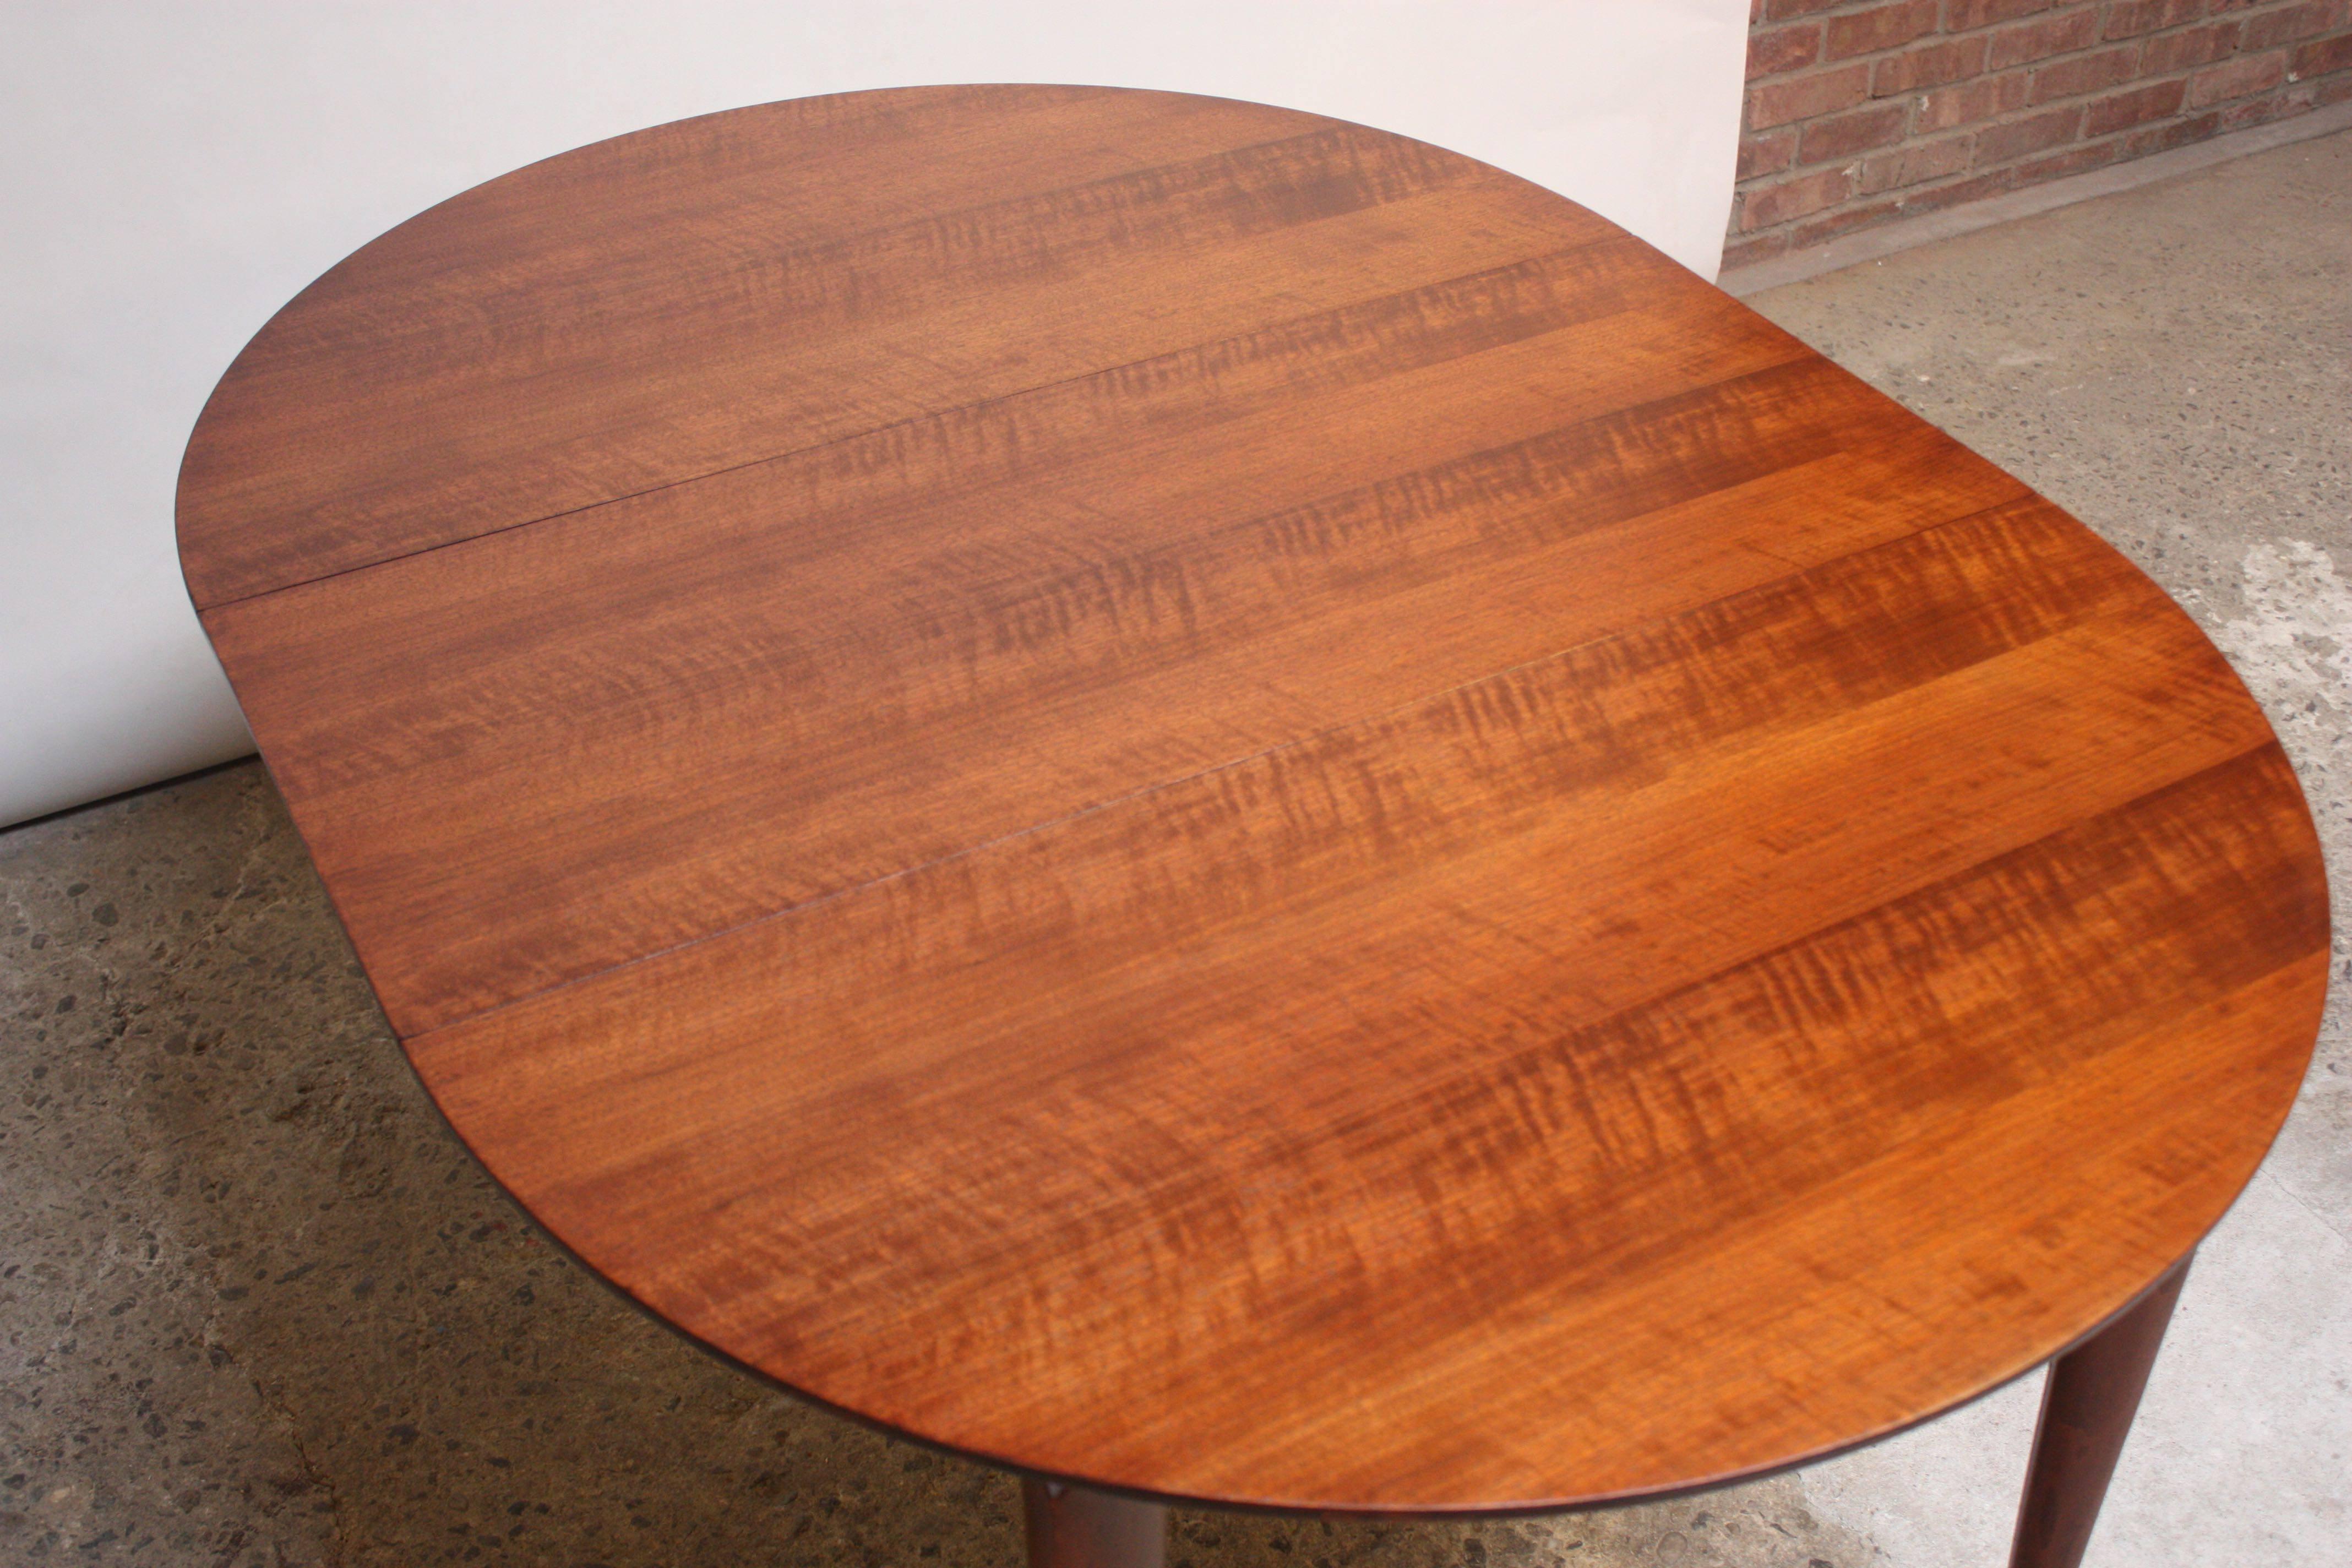 This is the smaller version of the Gio Ponti for Singer & Sons table (they were produced in both 48